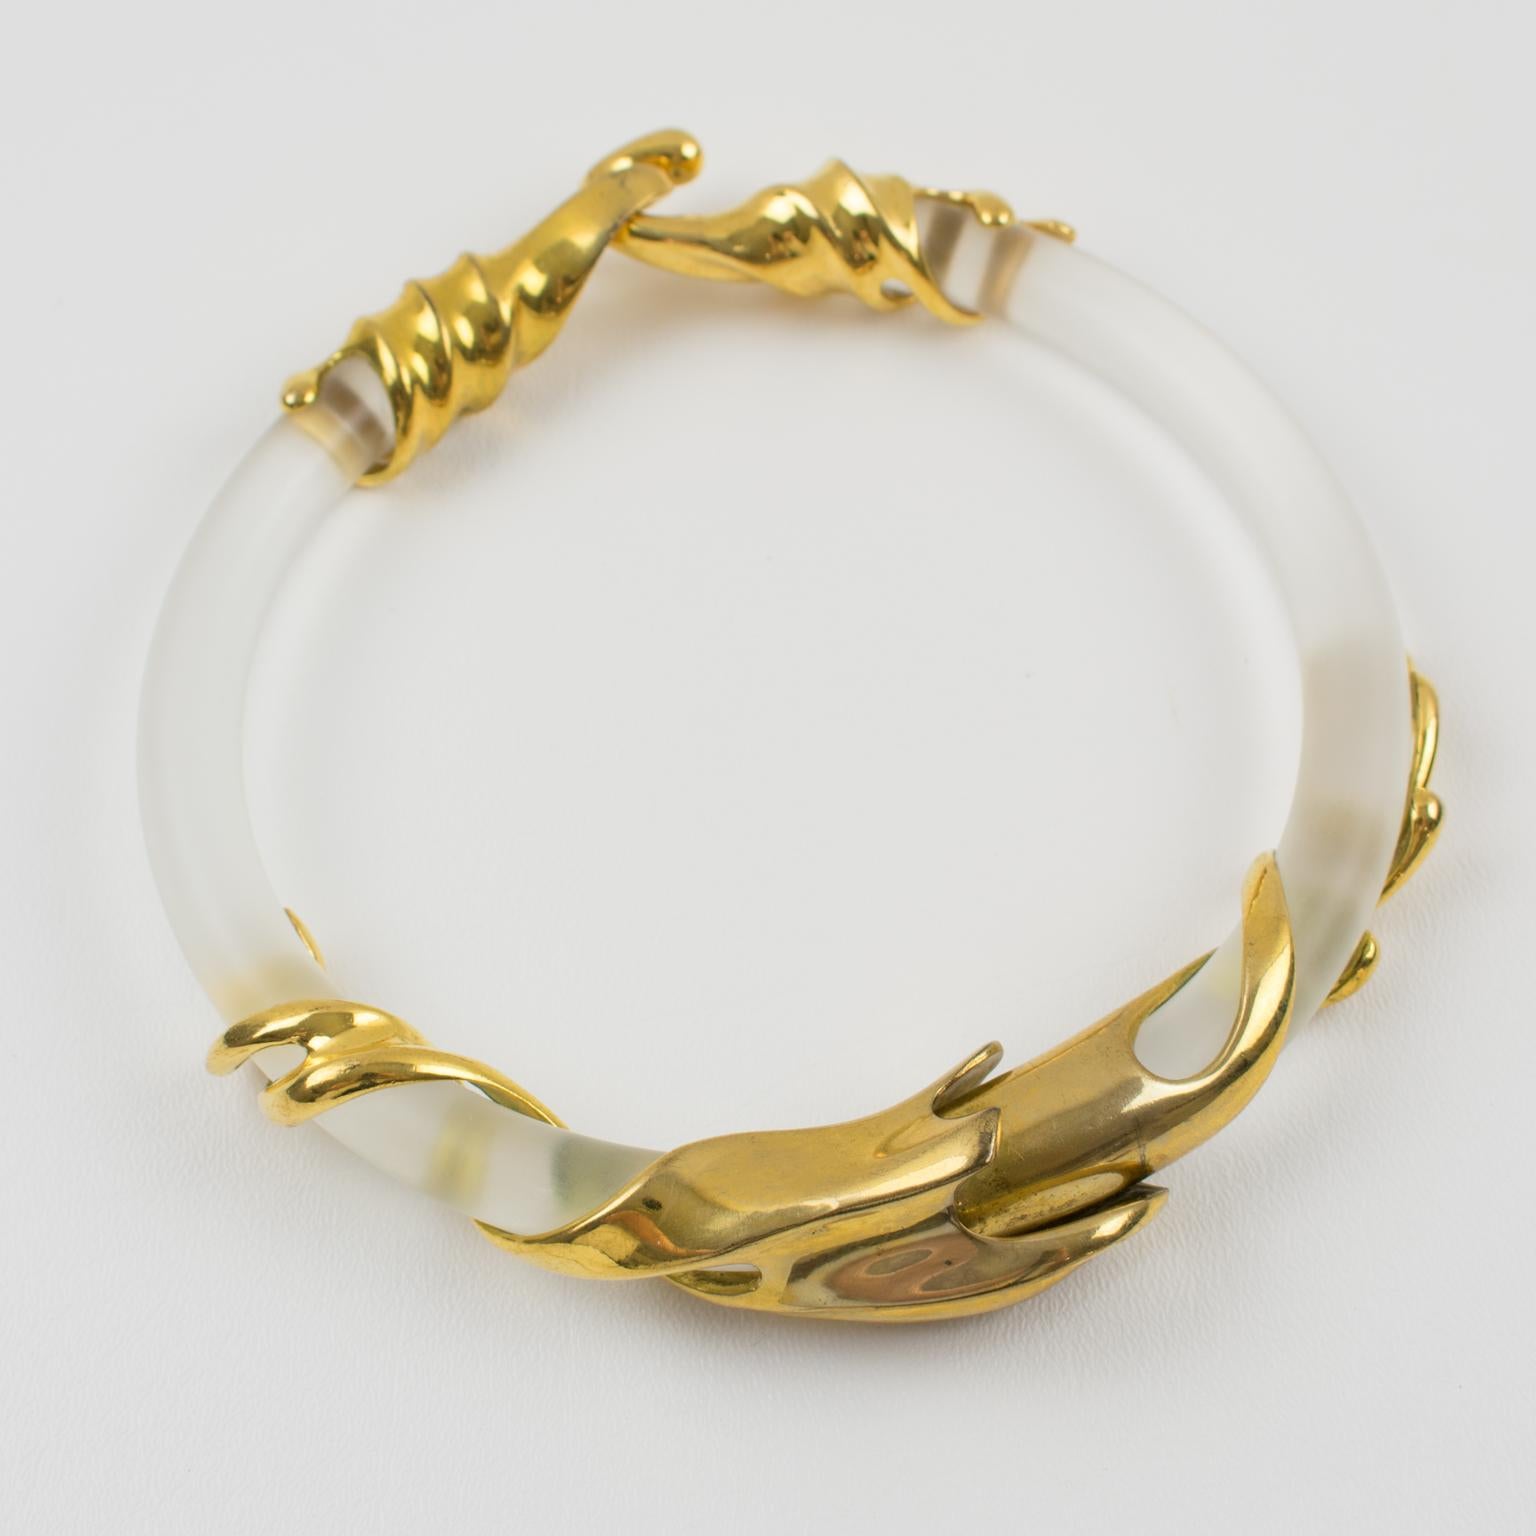 Outstanding sculptural Lucite choker necklace by Inna Cytrine Paris. The bold rigid collar necklace is fully articulated. Futurist gilt bronze metal embellishments wrap around the frosted lucite band. Fits very nicely around the neck. Large hook